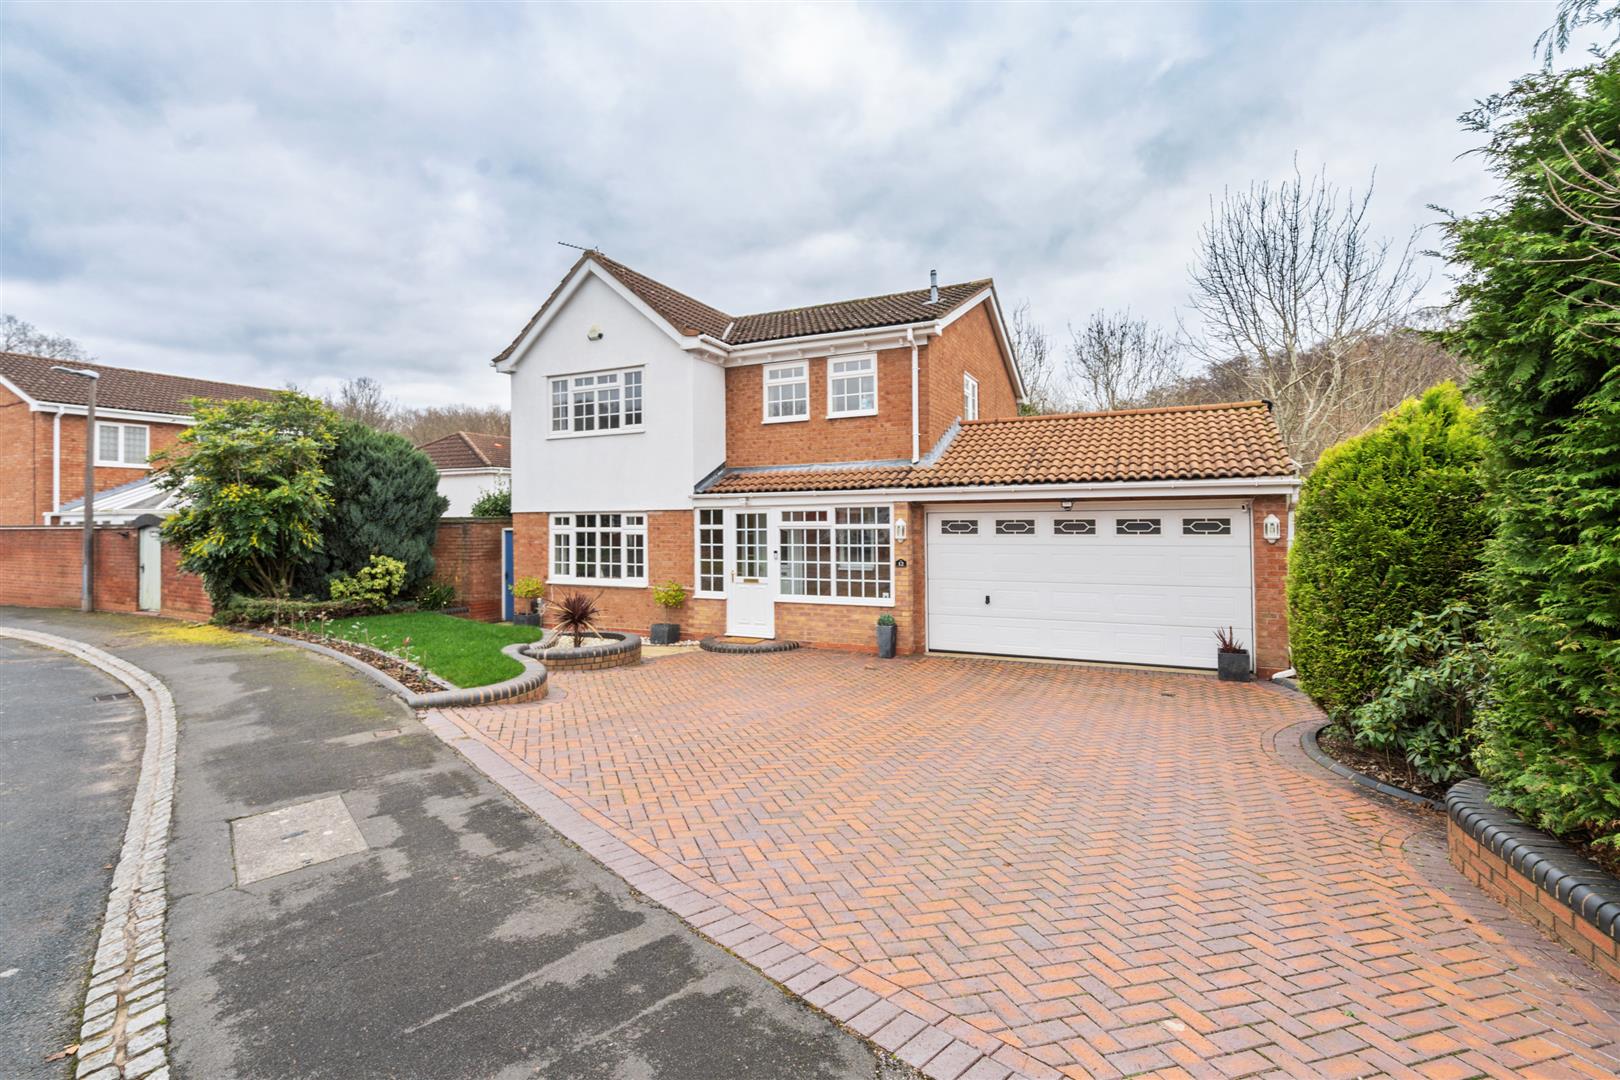 4 bed detached house for sale in Elmdon Coppice, Solihull  - Property Image 16